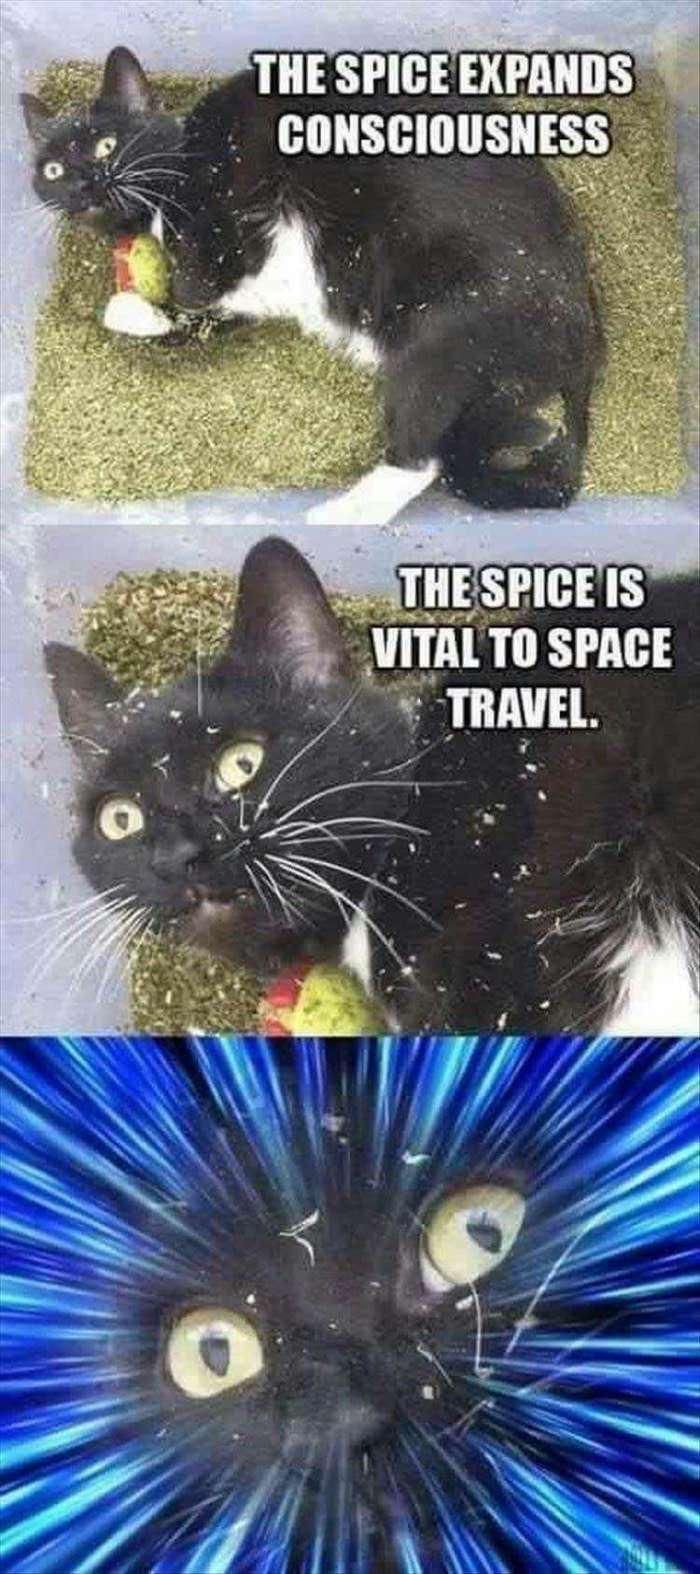 The spice must flow